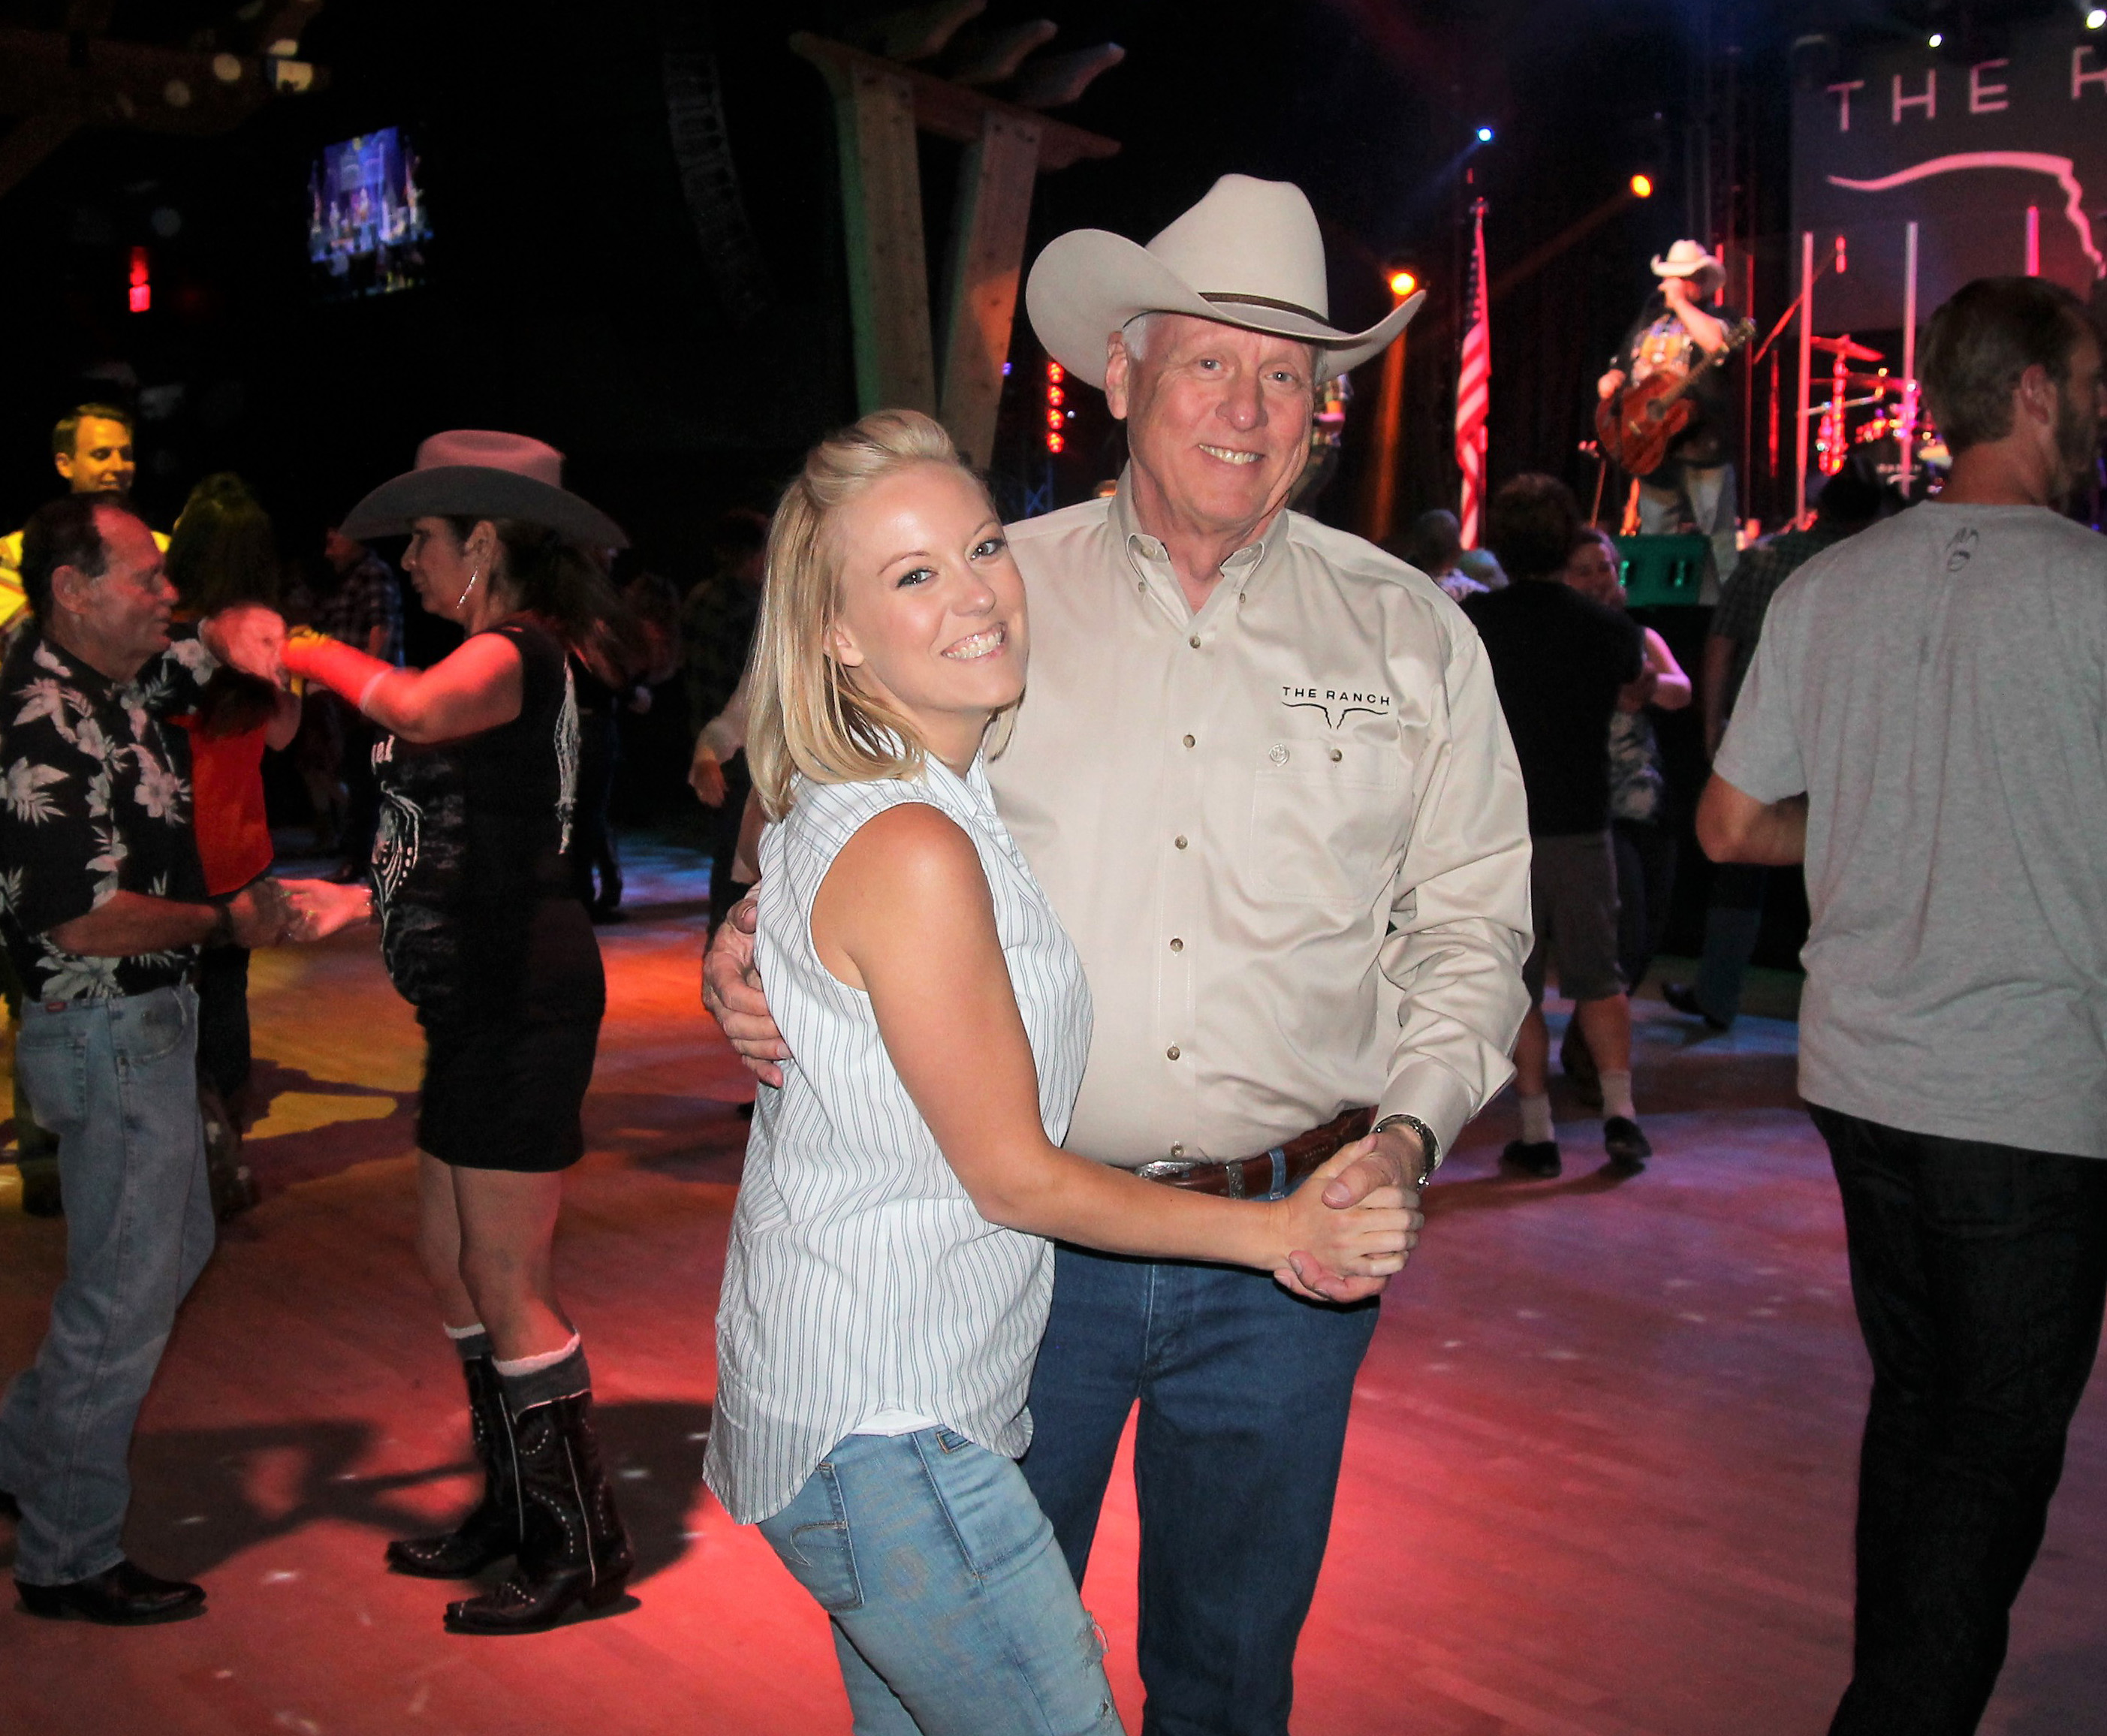 Andrew Edwards country dancing at the Saloon with his daughter, Ashton